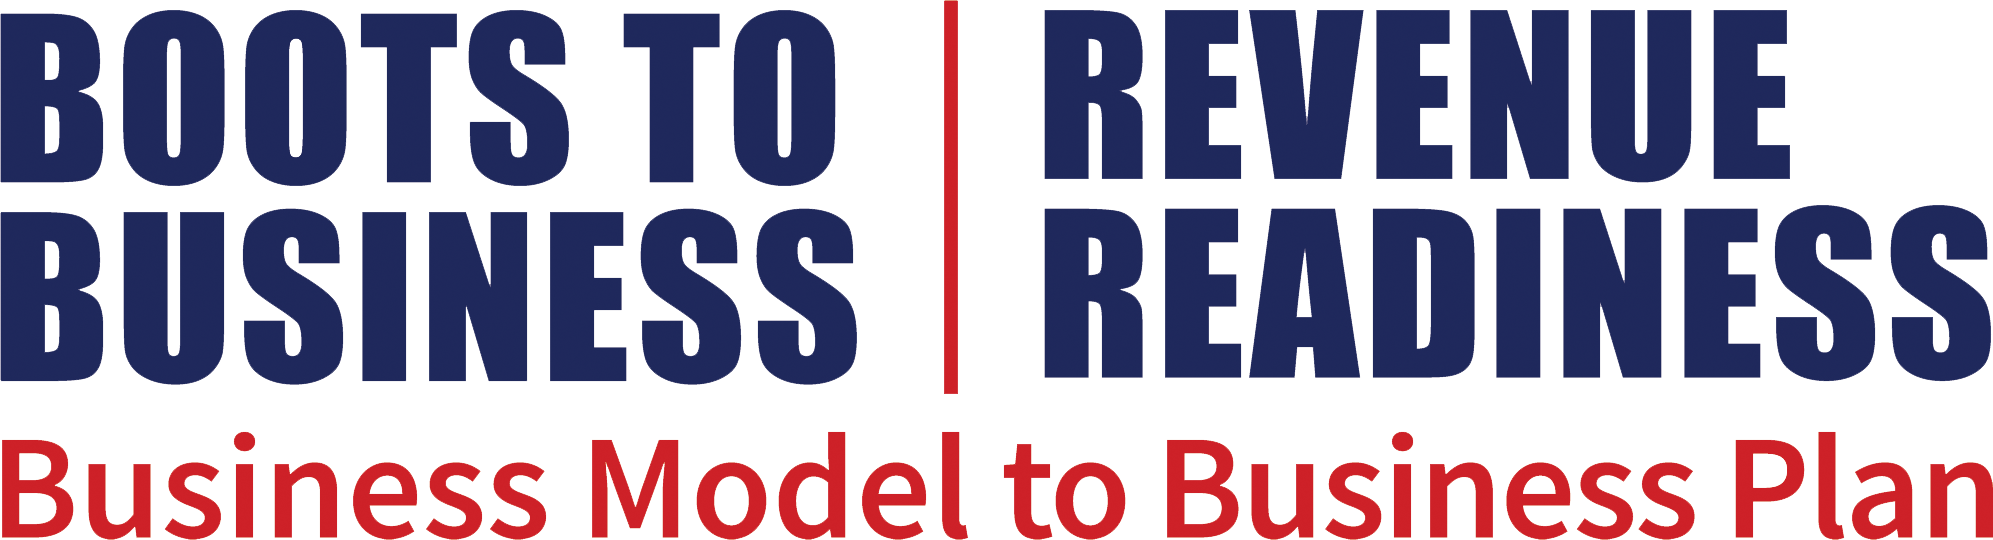 Boots to Business Revenue Readiness logo